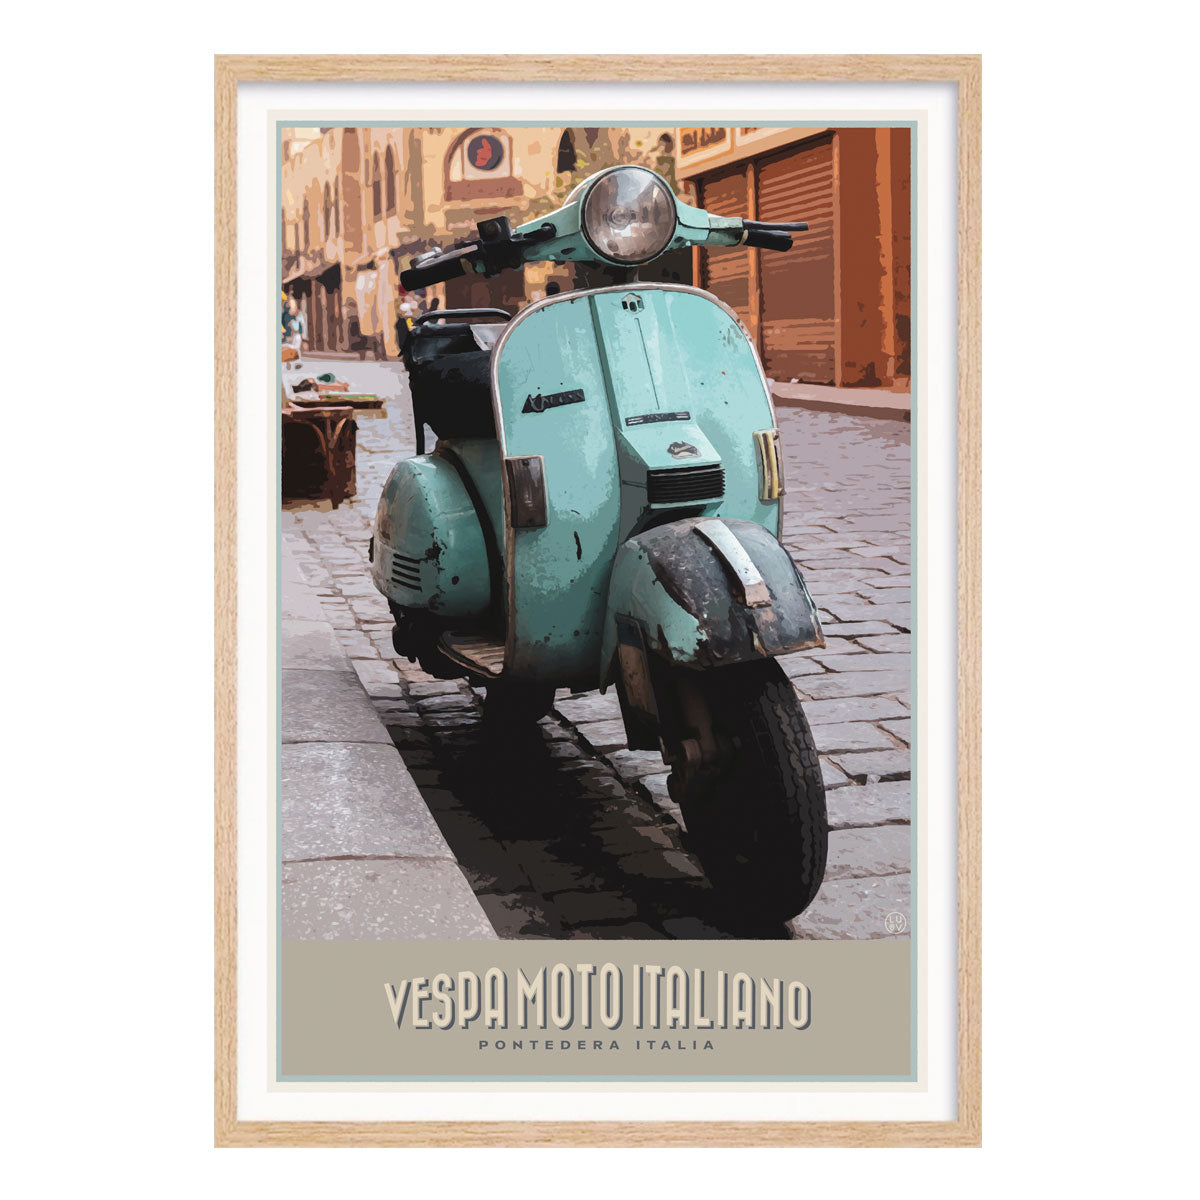 Vespa italy vintage retro poster print in oak frame by Places We Luv